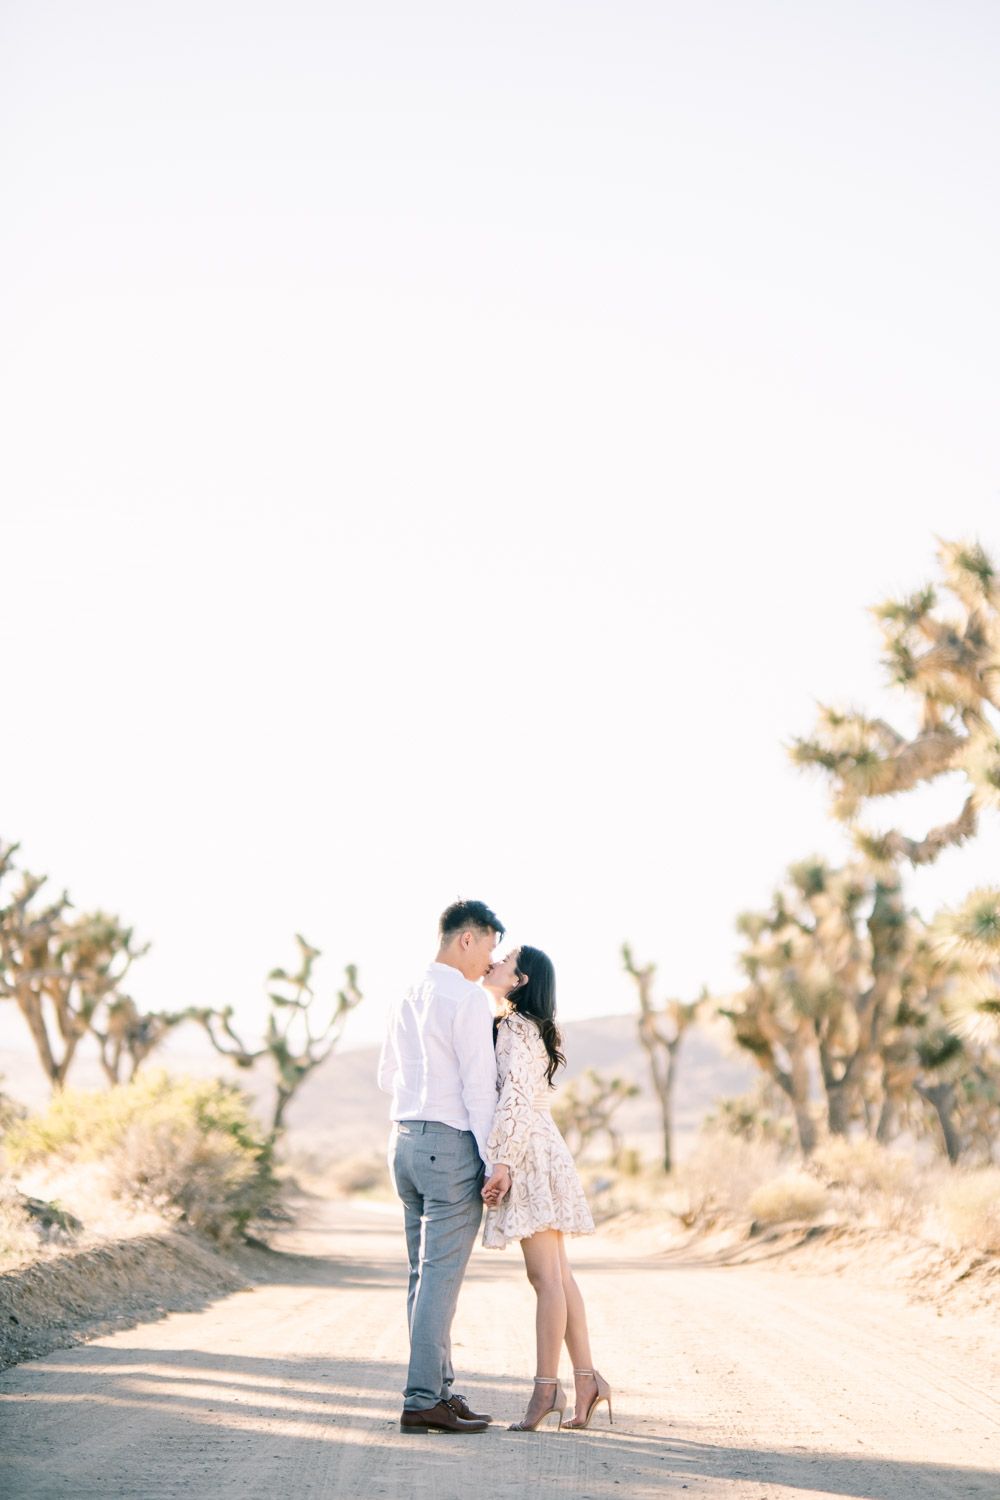 Best Engagement Photo Locations in Los Angeles - Joshua Tree